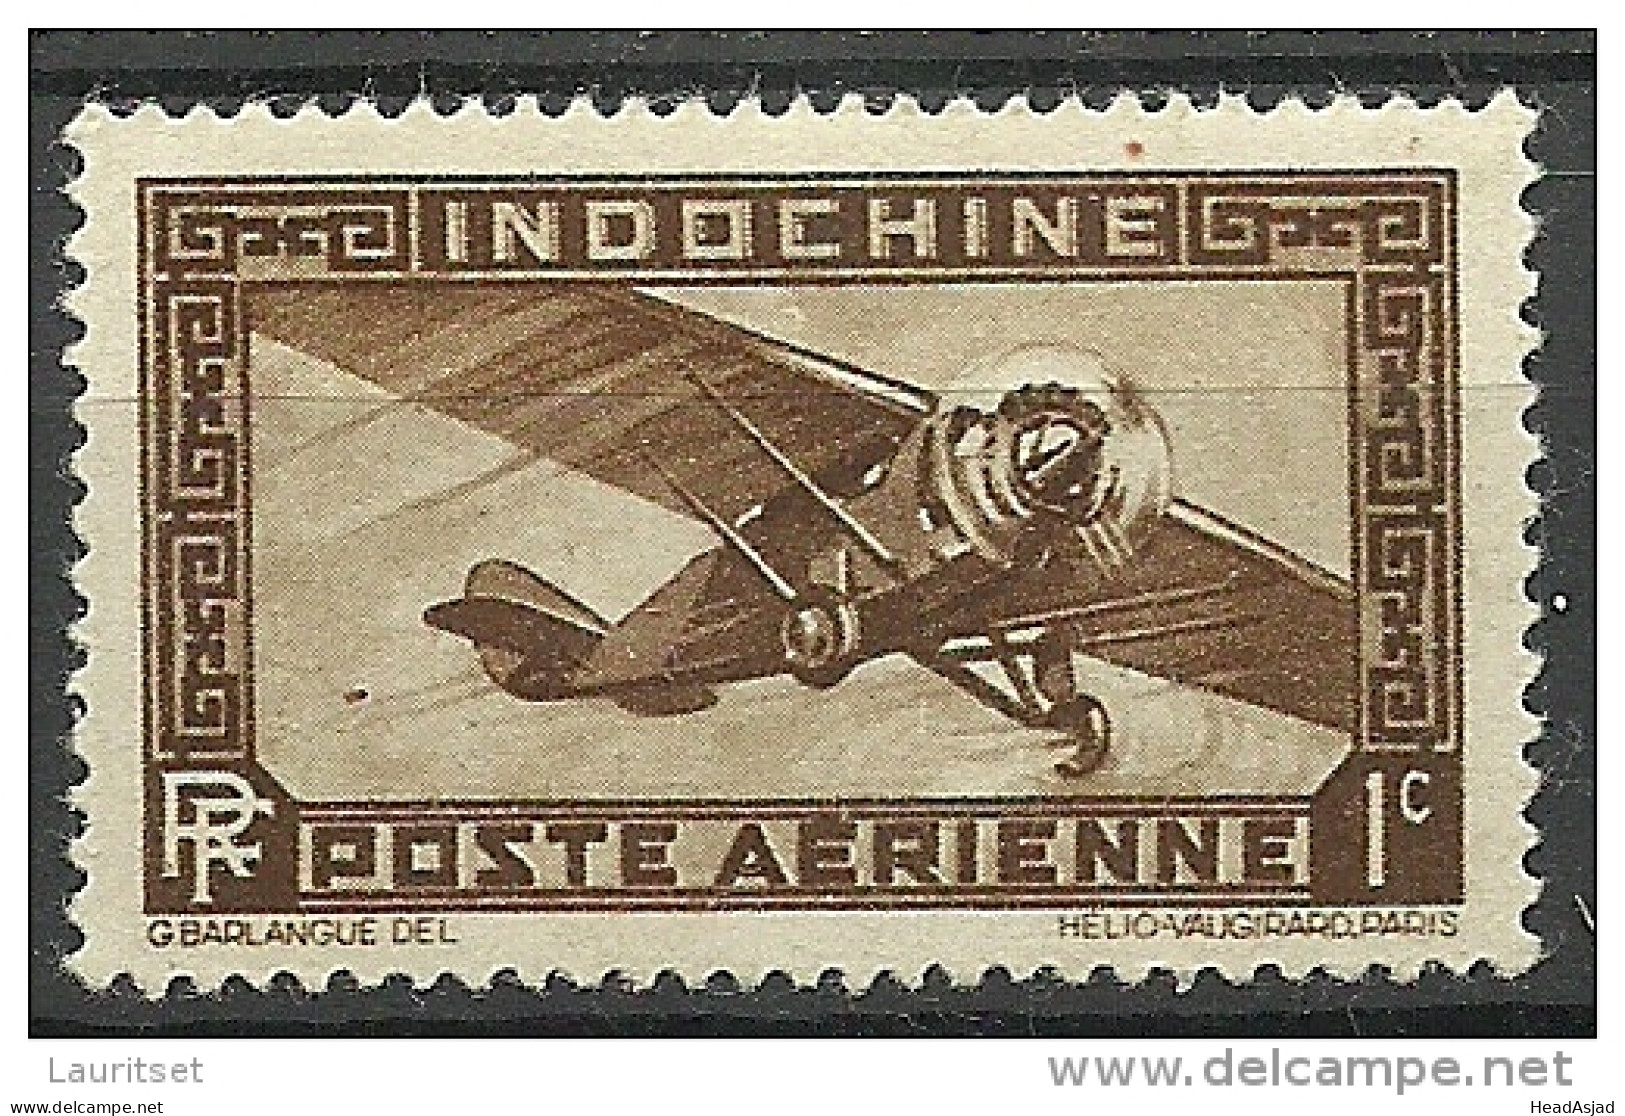 France INDO-CHINA Michel 184 * Flugzeug Air Plane - Airplanes